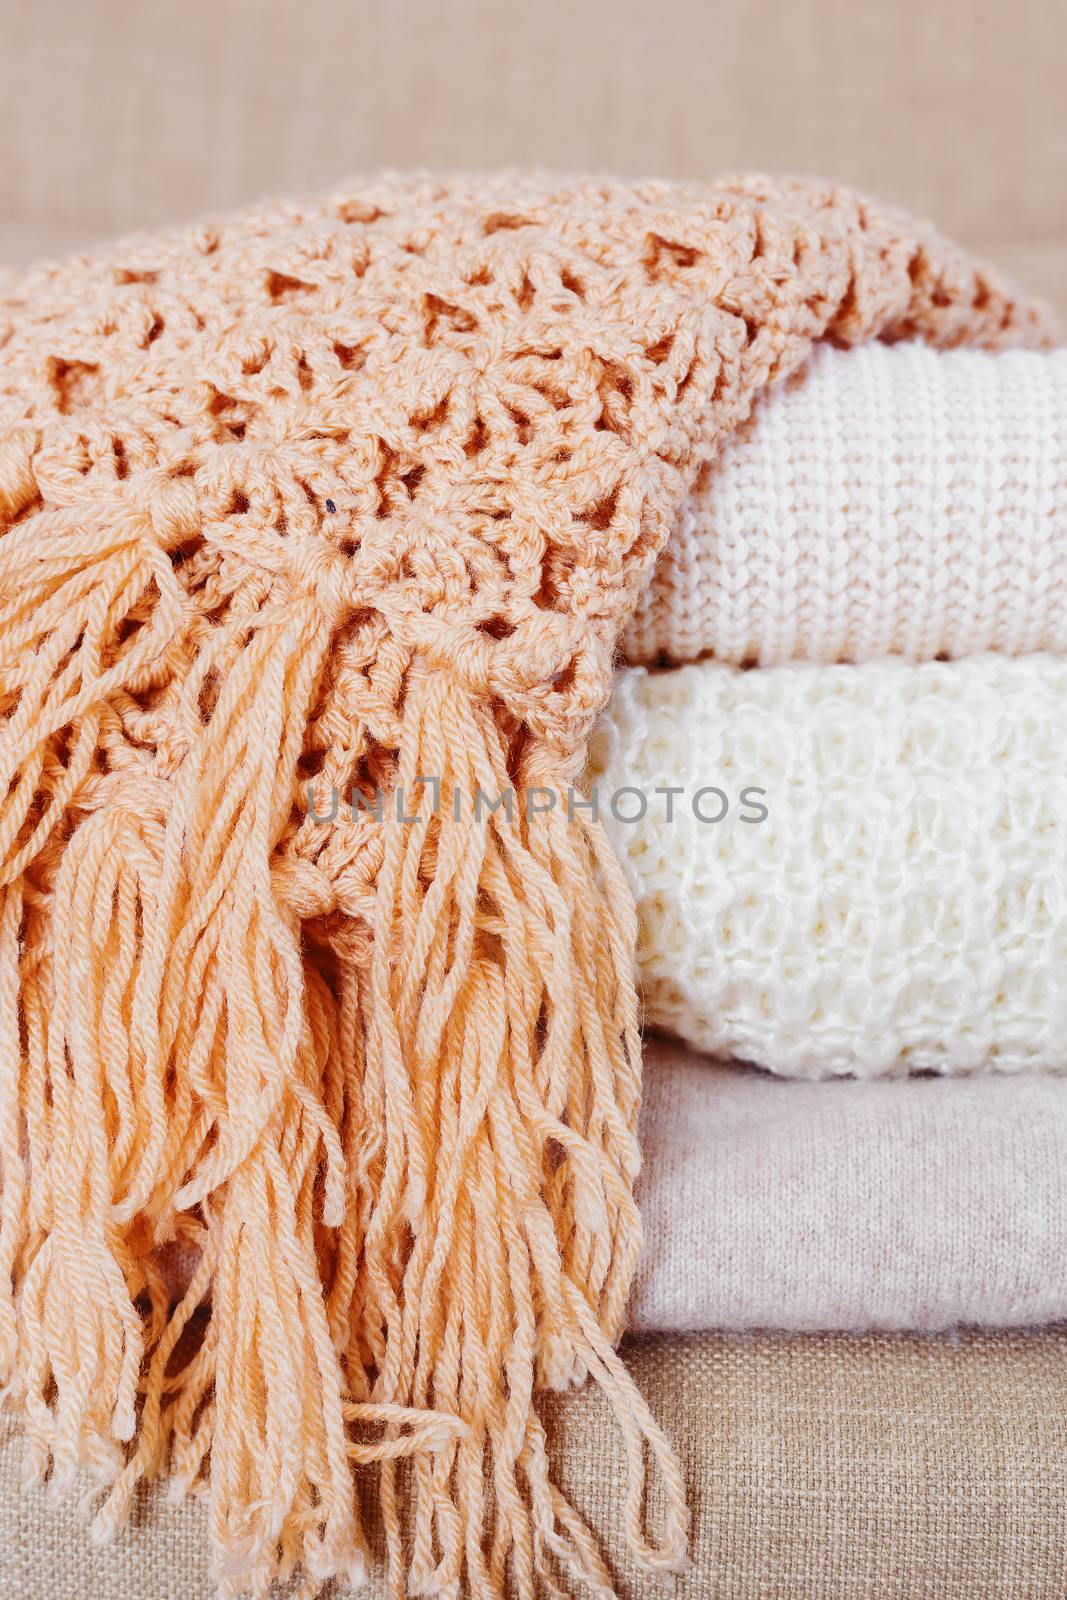 Pile of beige woolen clothes. Warm knitted sweaters and scarfs are folded in one heap.